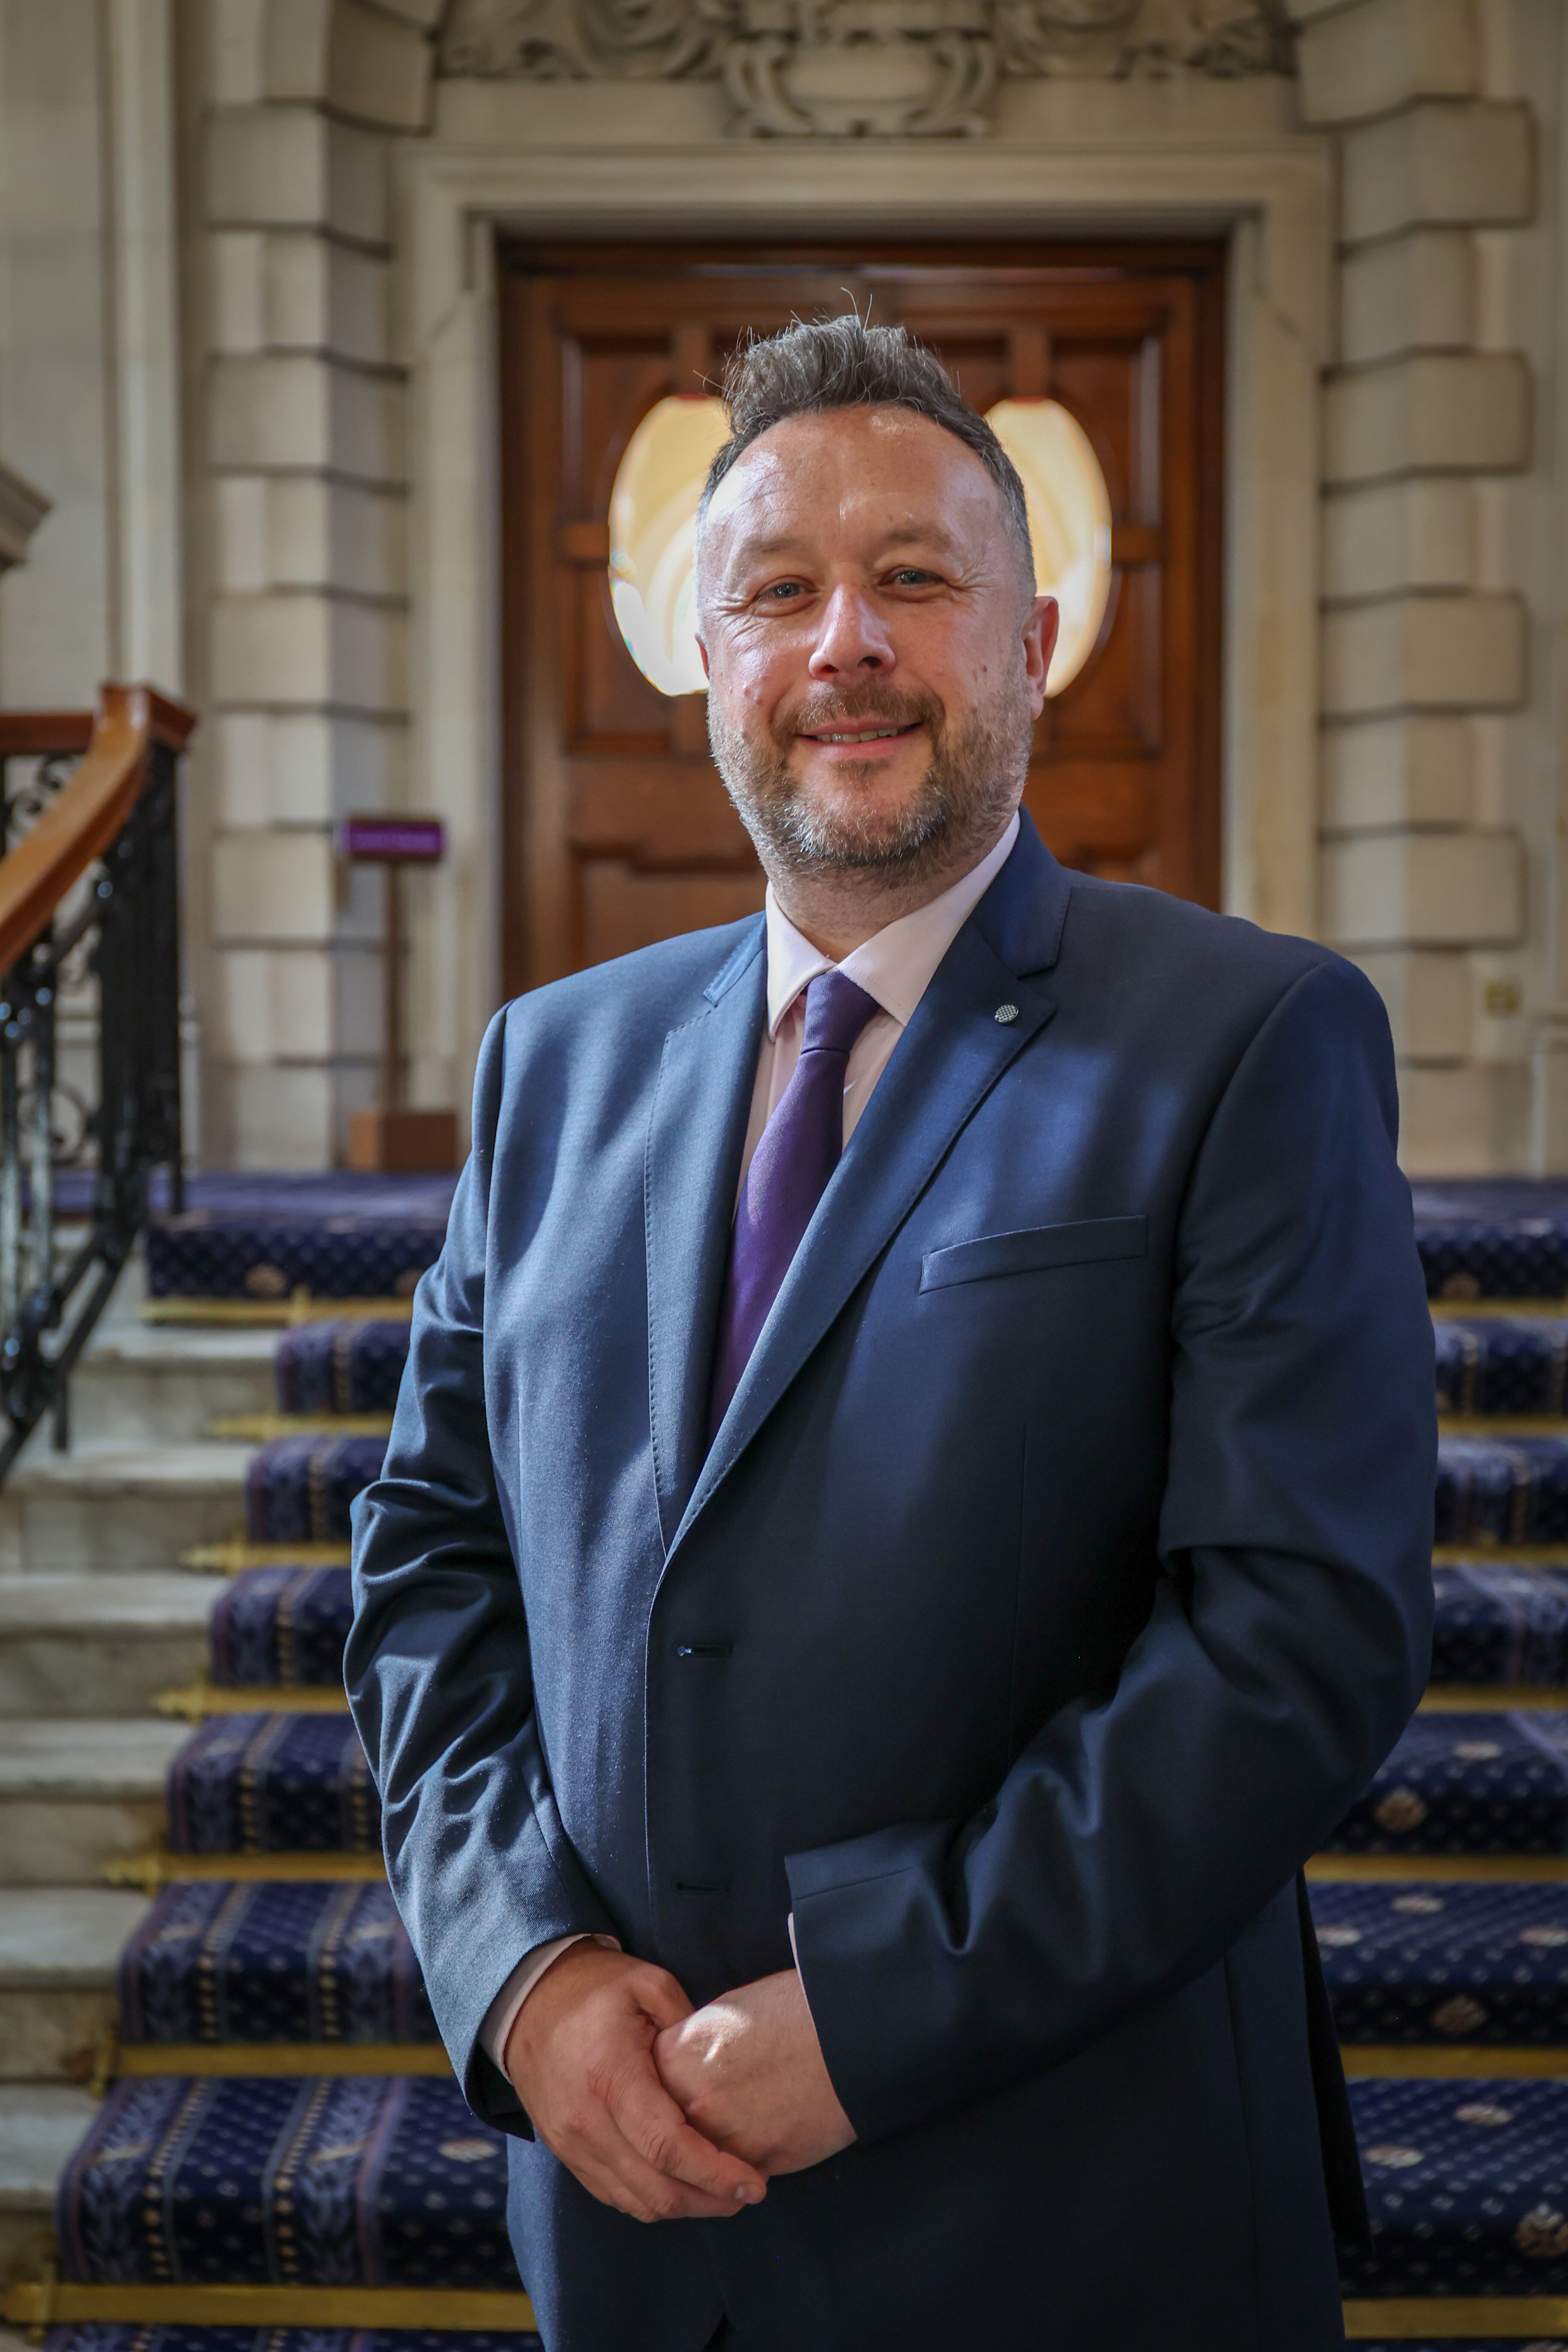 Cllr Perry - Leader of Walsall Council, outside the steps to the Council Chamber of the Council House